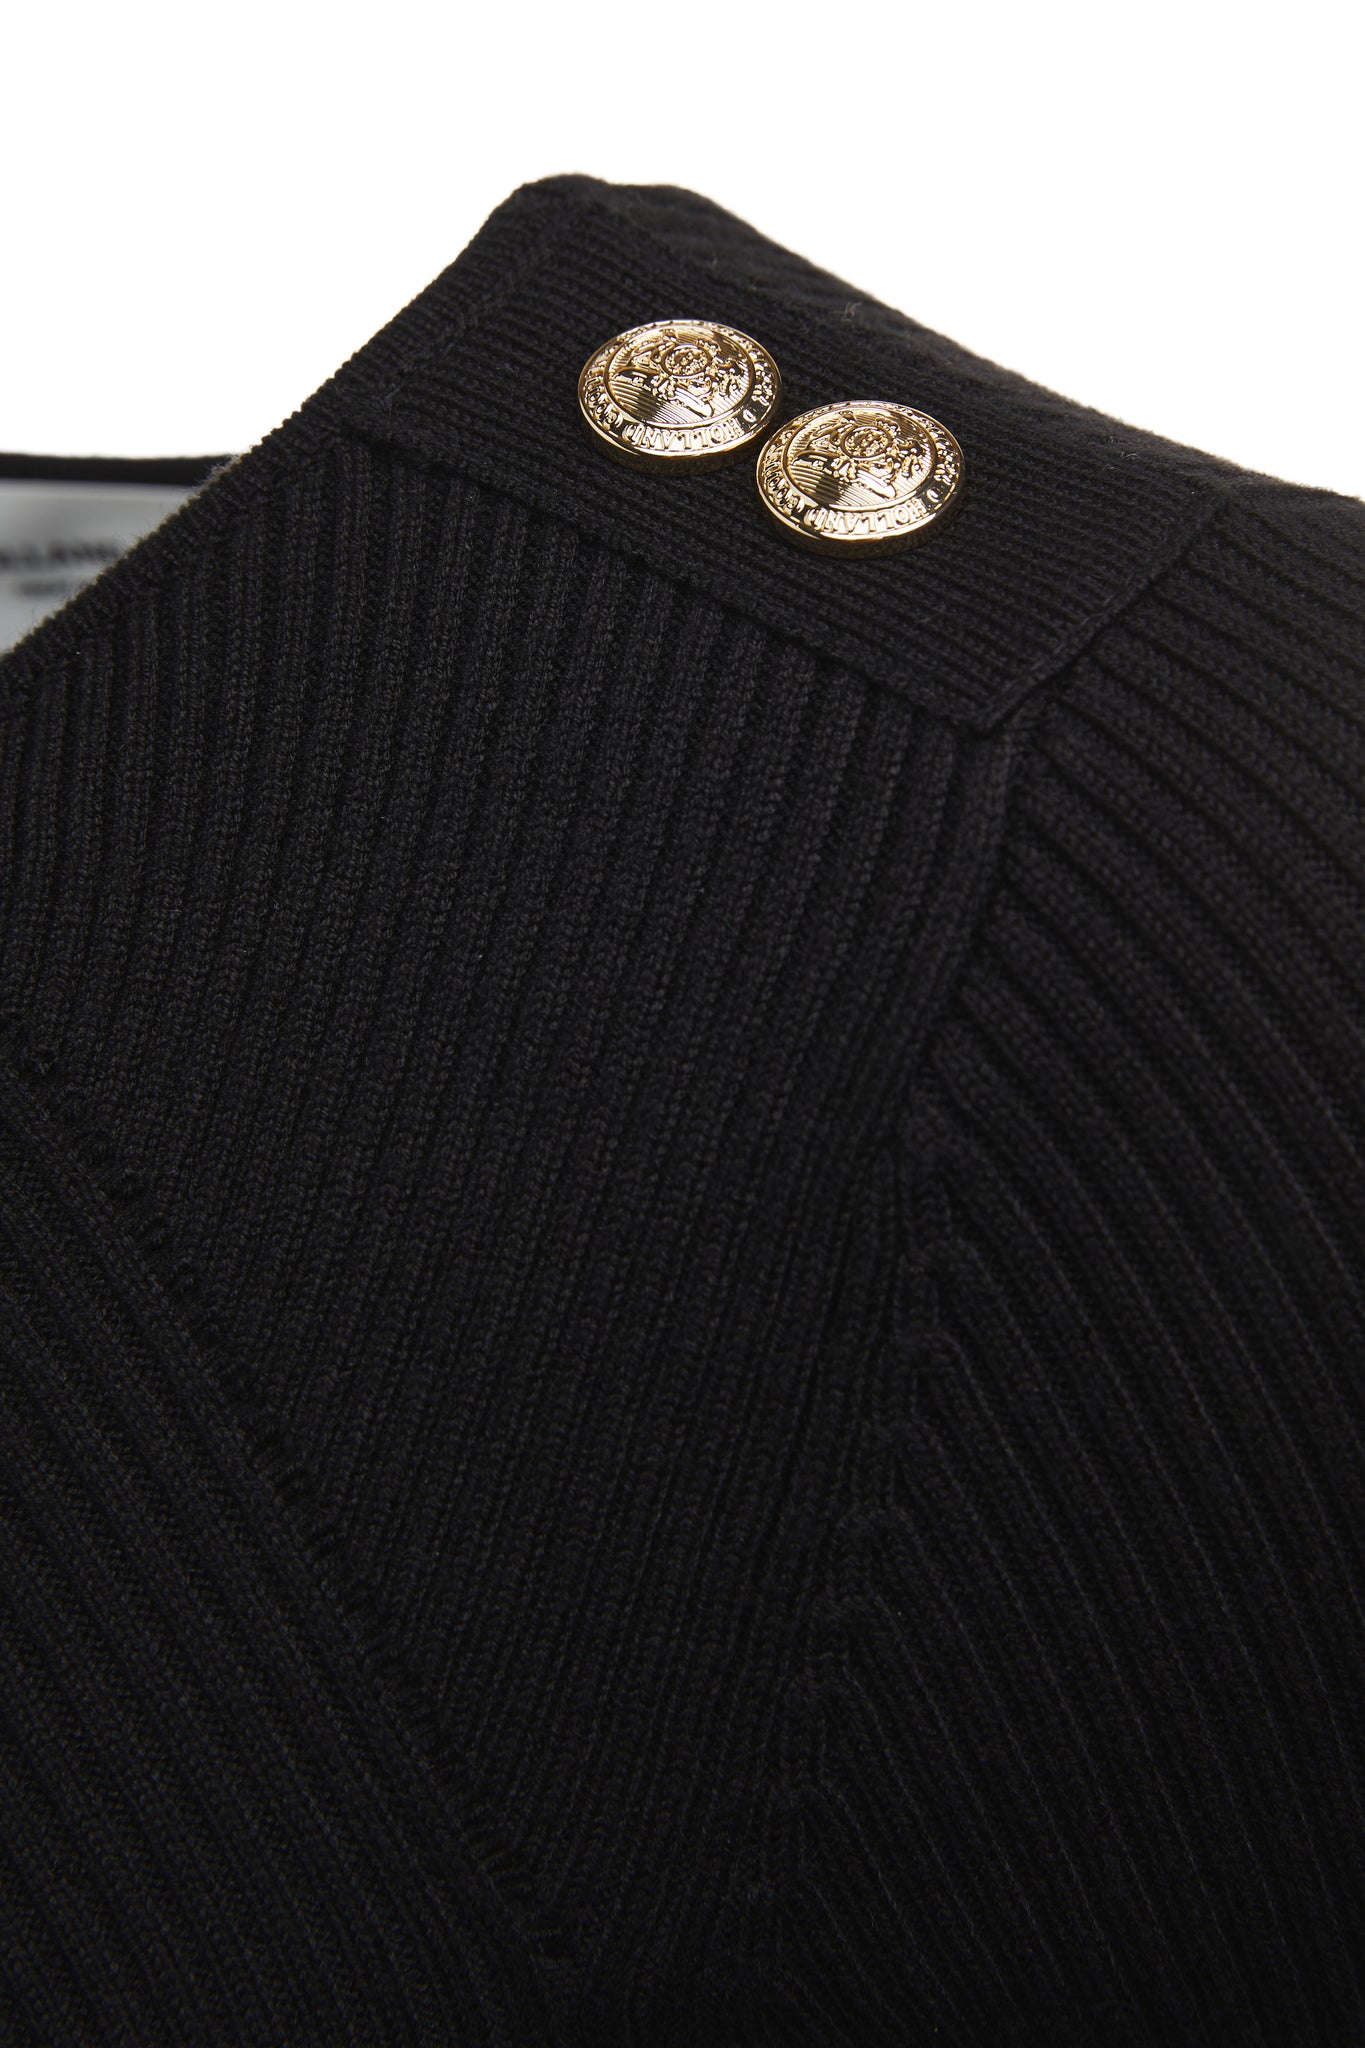 gold button detail across shoulders of a form fitting lightweight ribbed knit black jumper with a boat neckline and bell sleeves